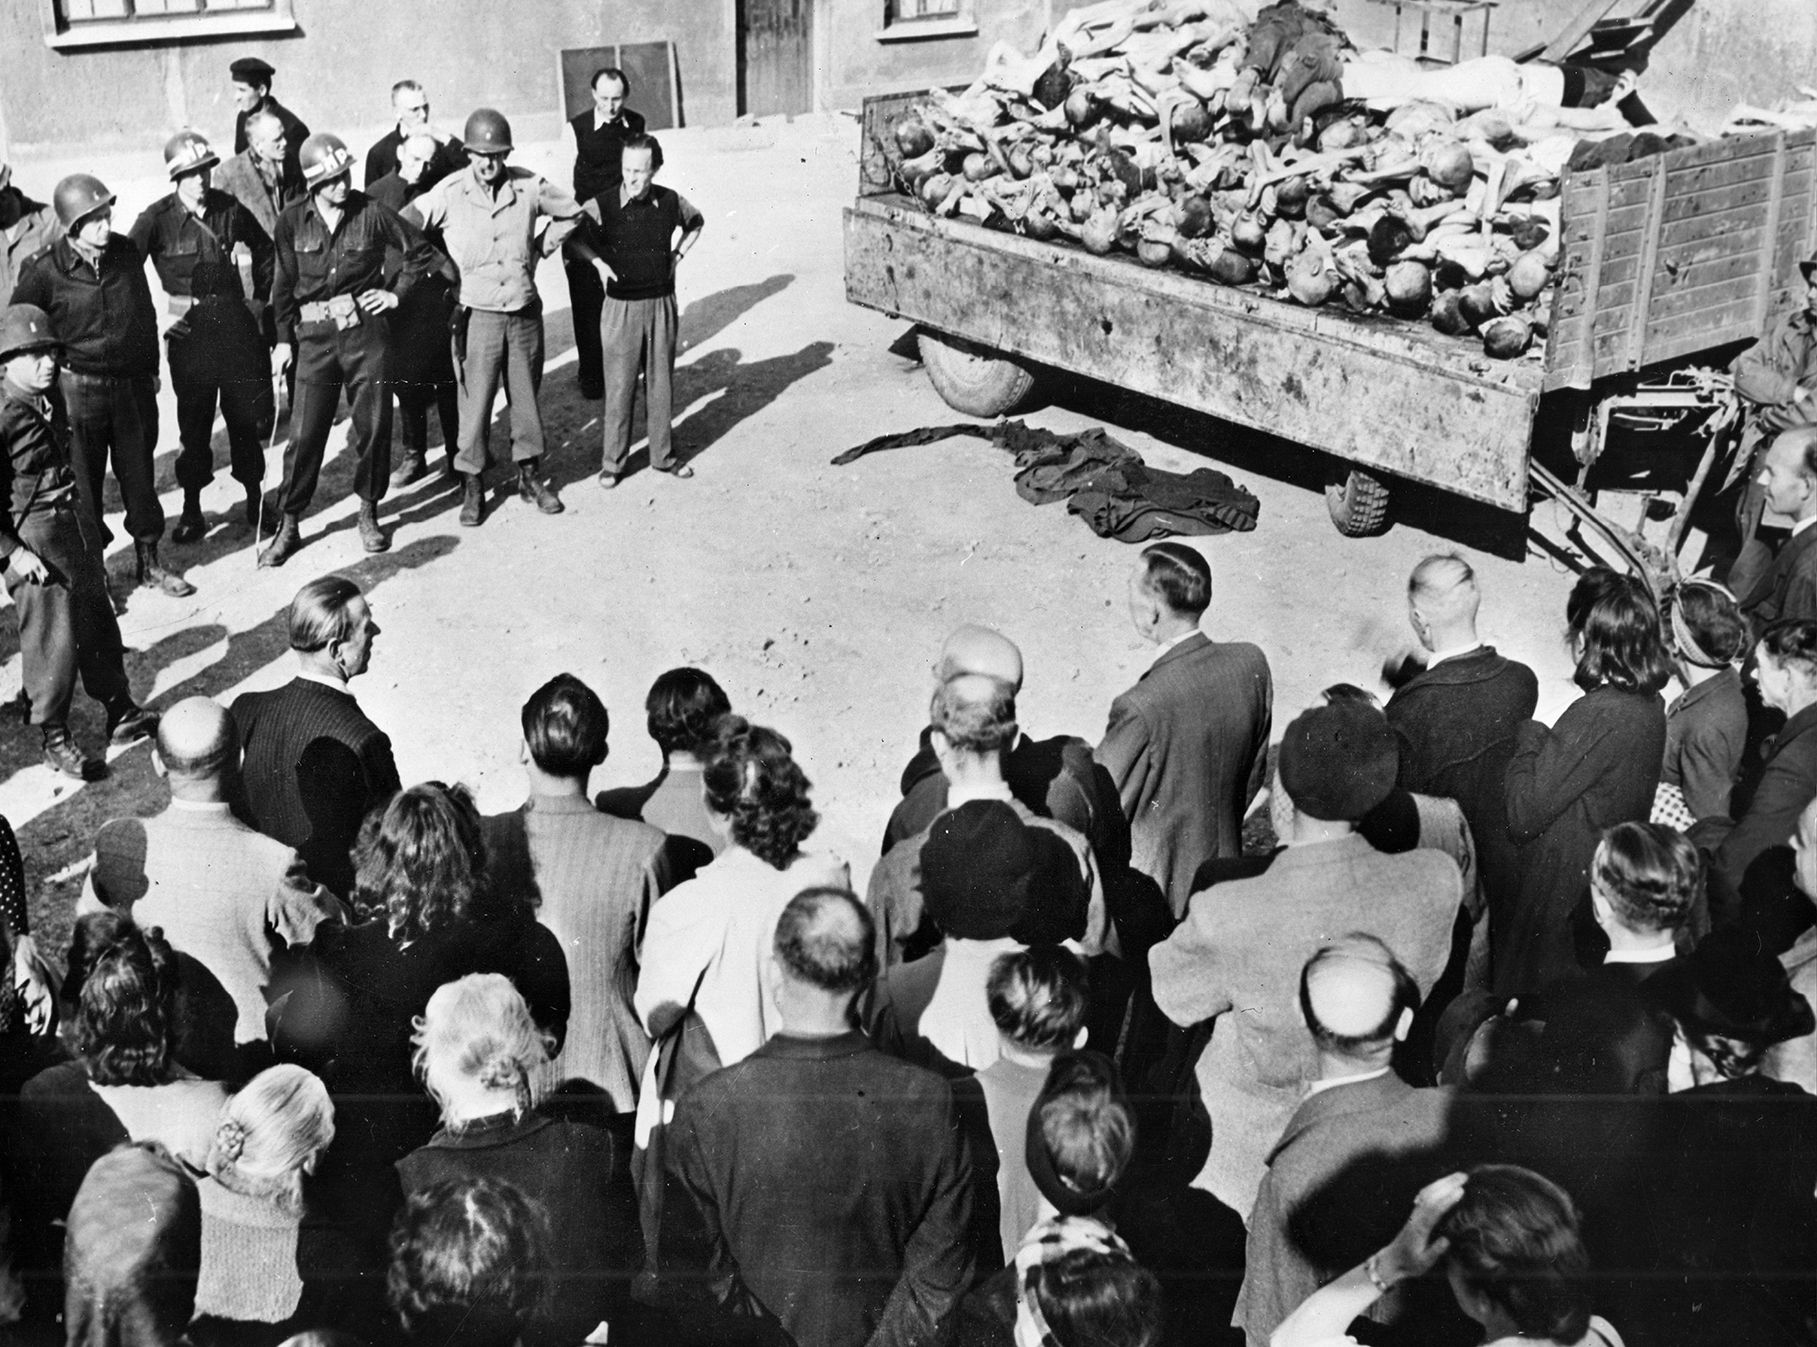 Elements of the Third Army, including the 80th Infantry Division, witnessed the horrors of the Buchenwald concentration camp, liberated on April 12, 1945. In this stark image, German civilians from the area surrounding the camp are forced to view the bodies of victims of the Nazi cruelty. They were brought to the camp under U.S. military escort. 